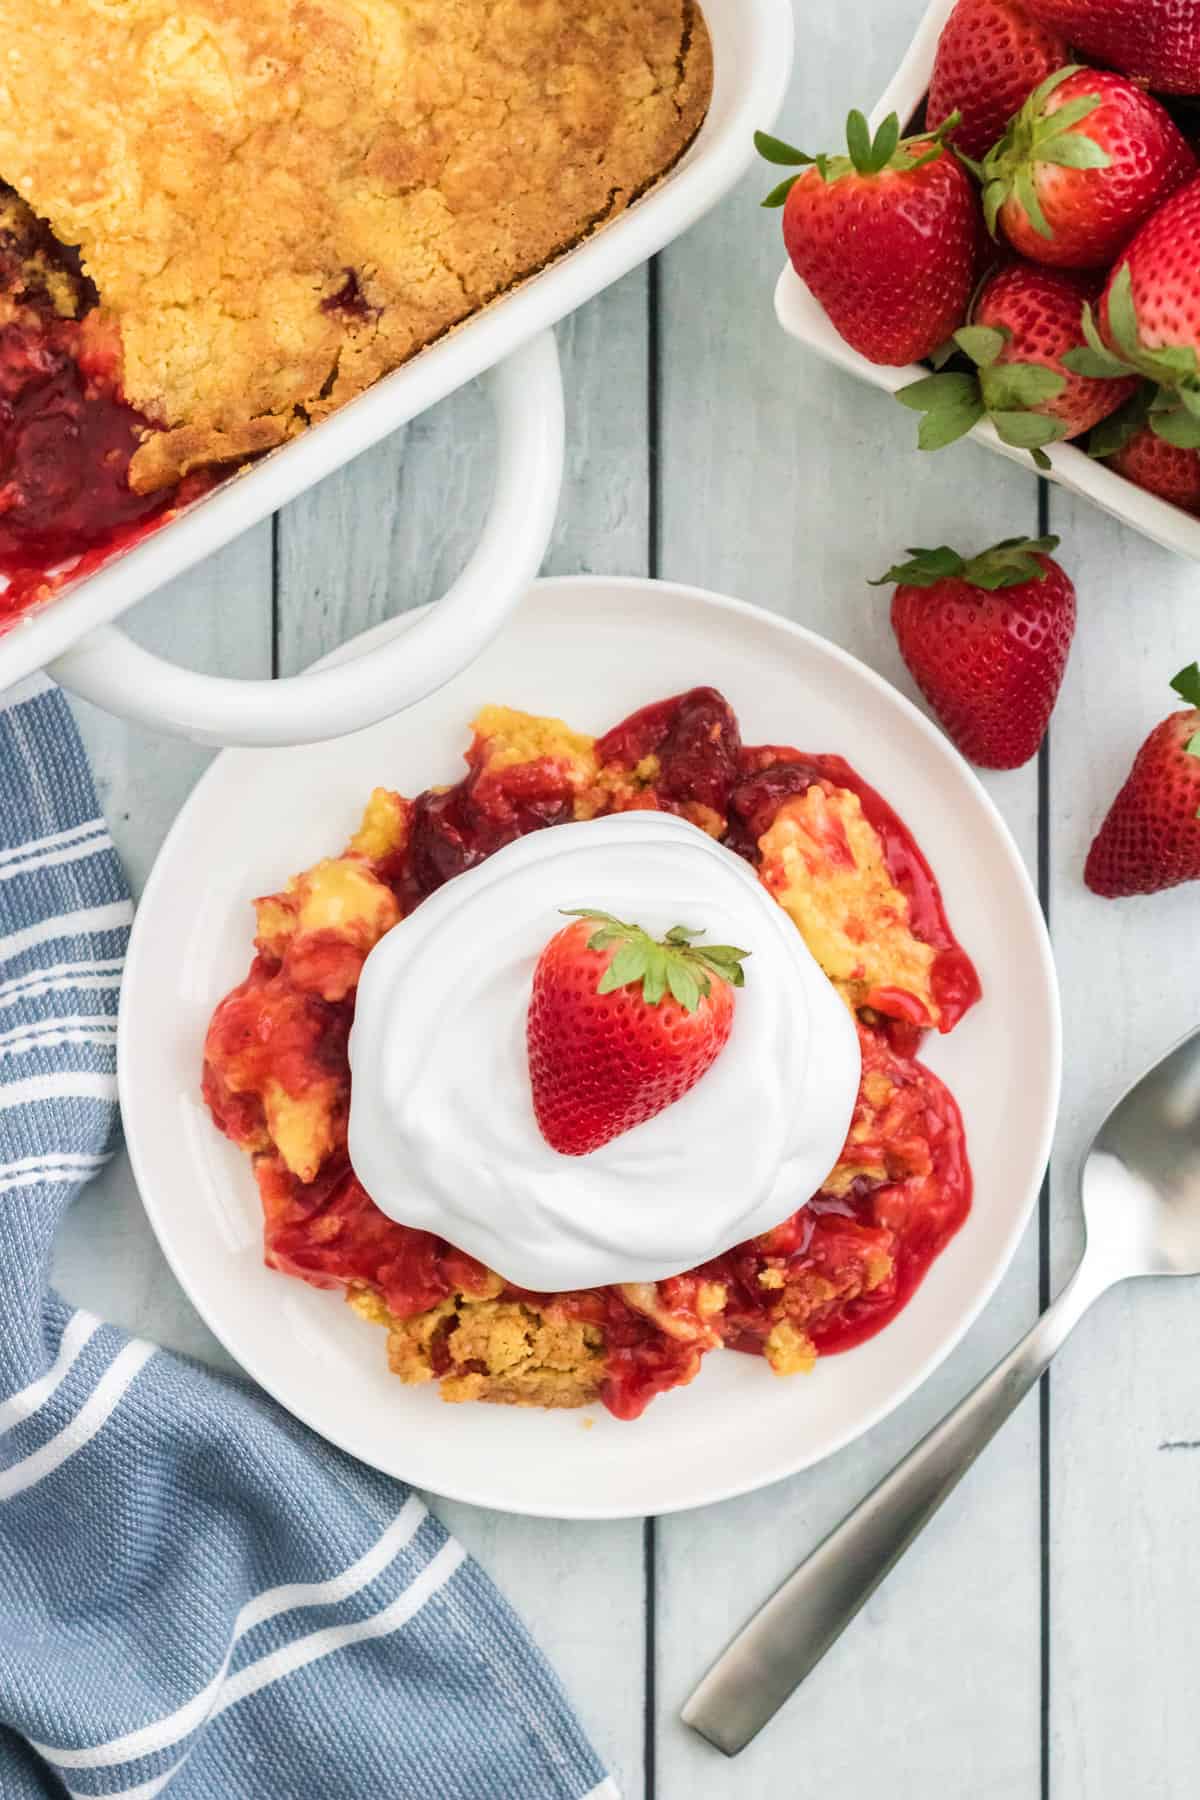 Strawberry dump cake serving on a plate topped with cool whip and a strawberry. Baking dish with remaining cake, a fork, a cloth napkin, and a pint of fresh strawberries are next to the plate.